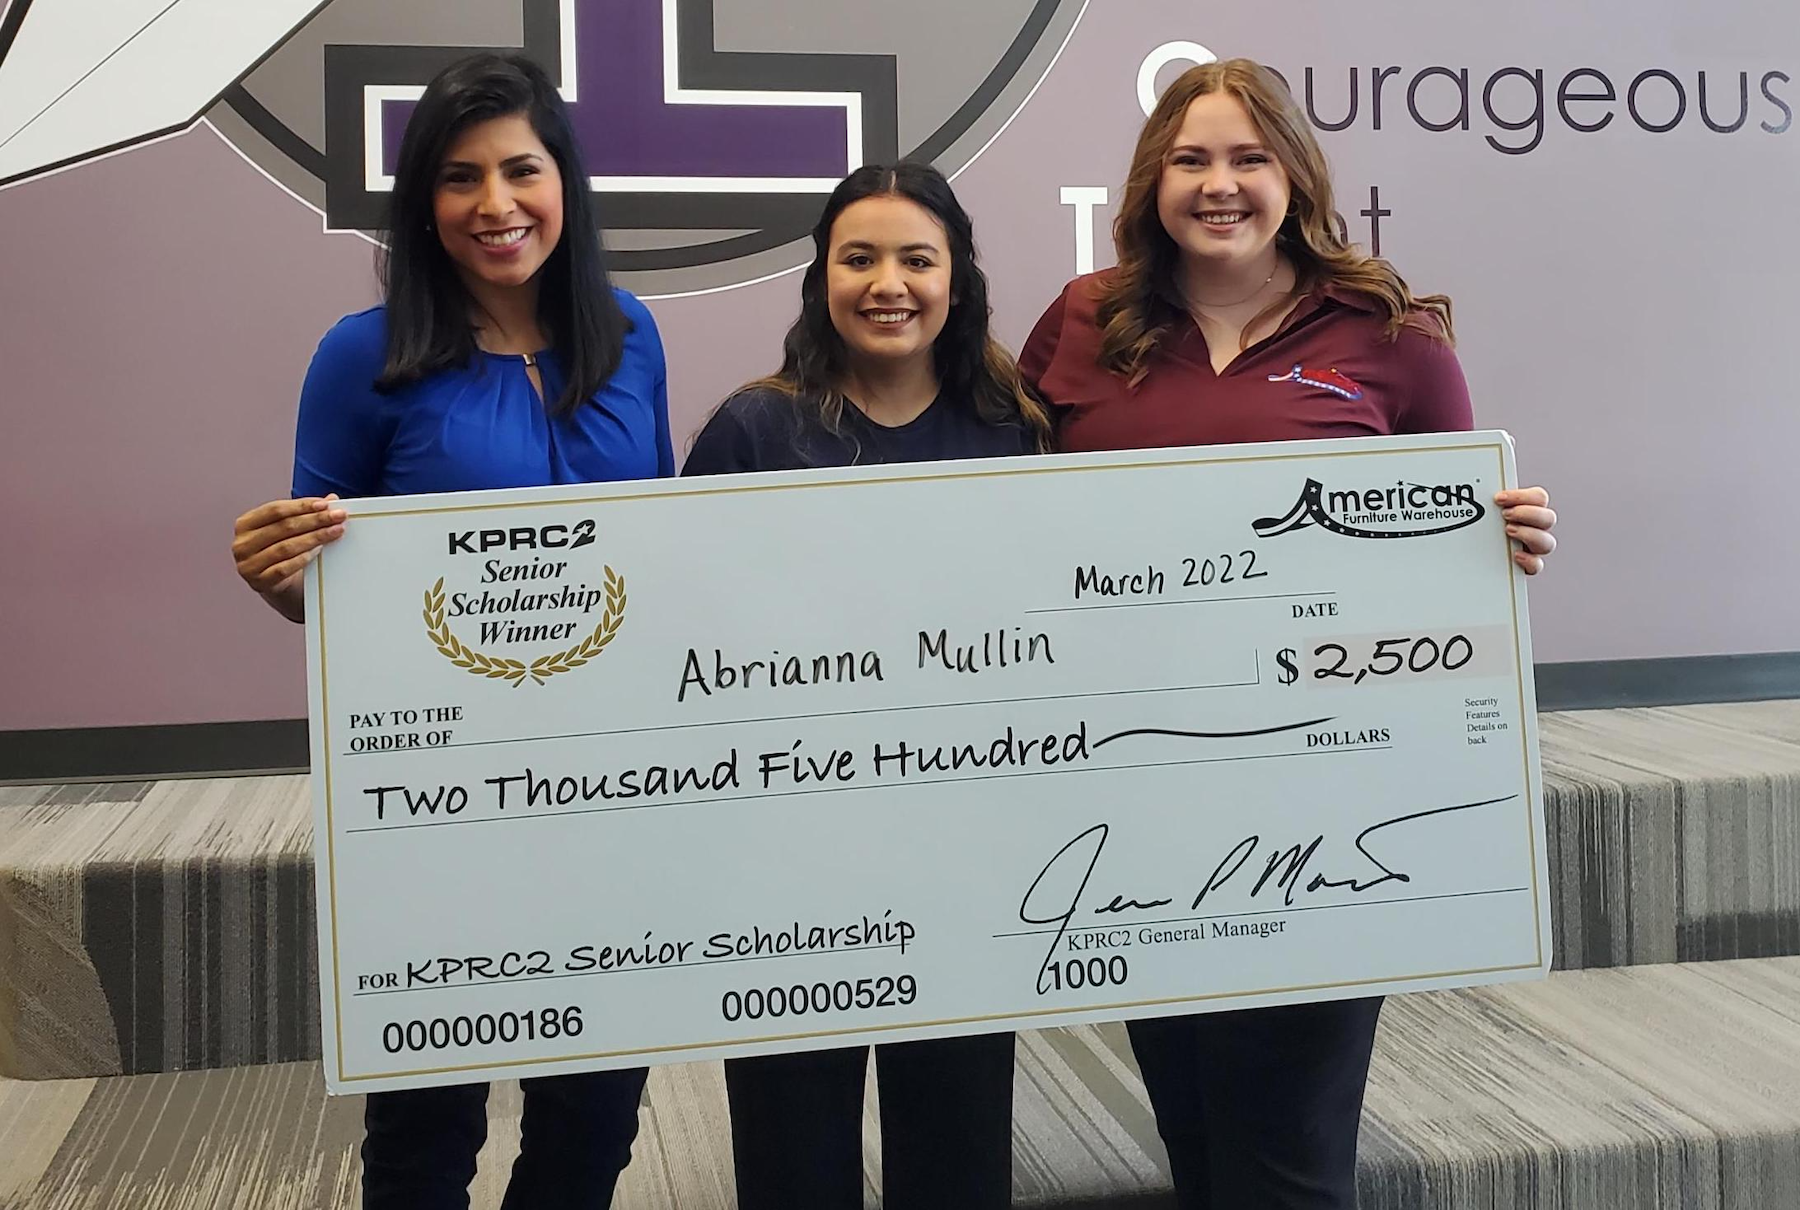 Abrianna Mullin poses holding giant check with sponsors